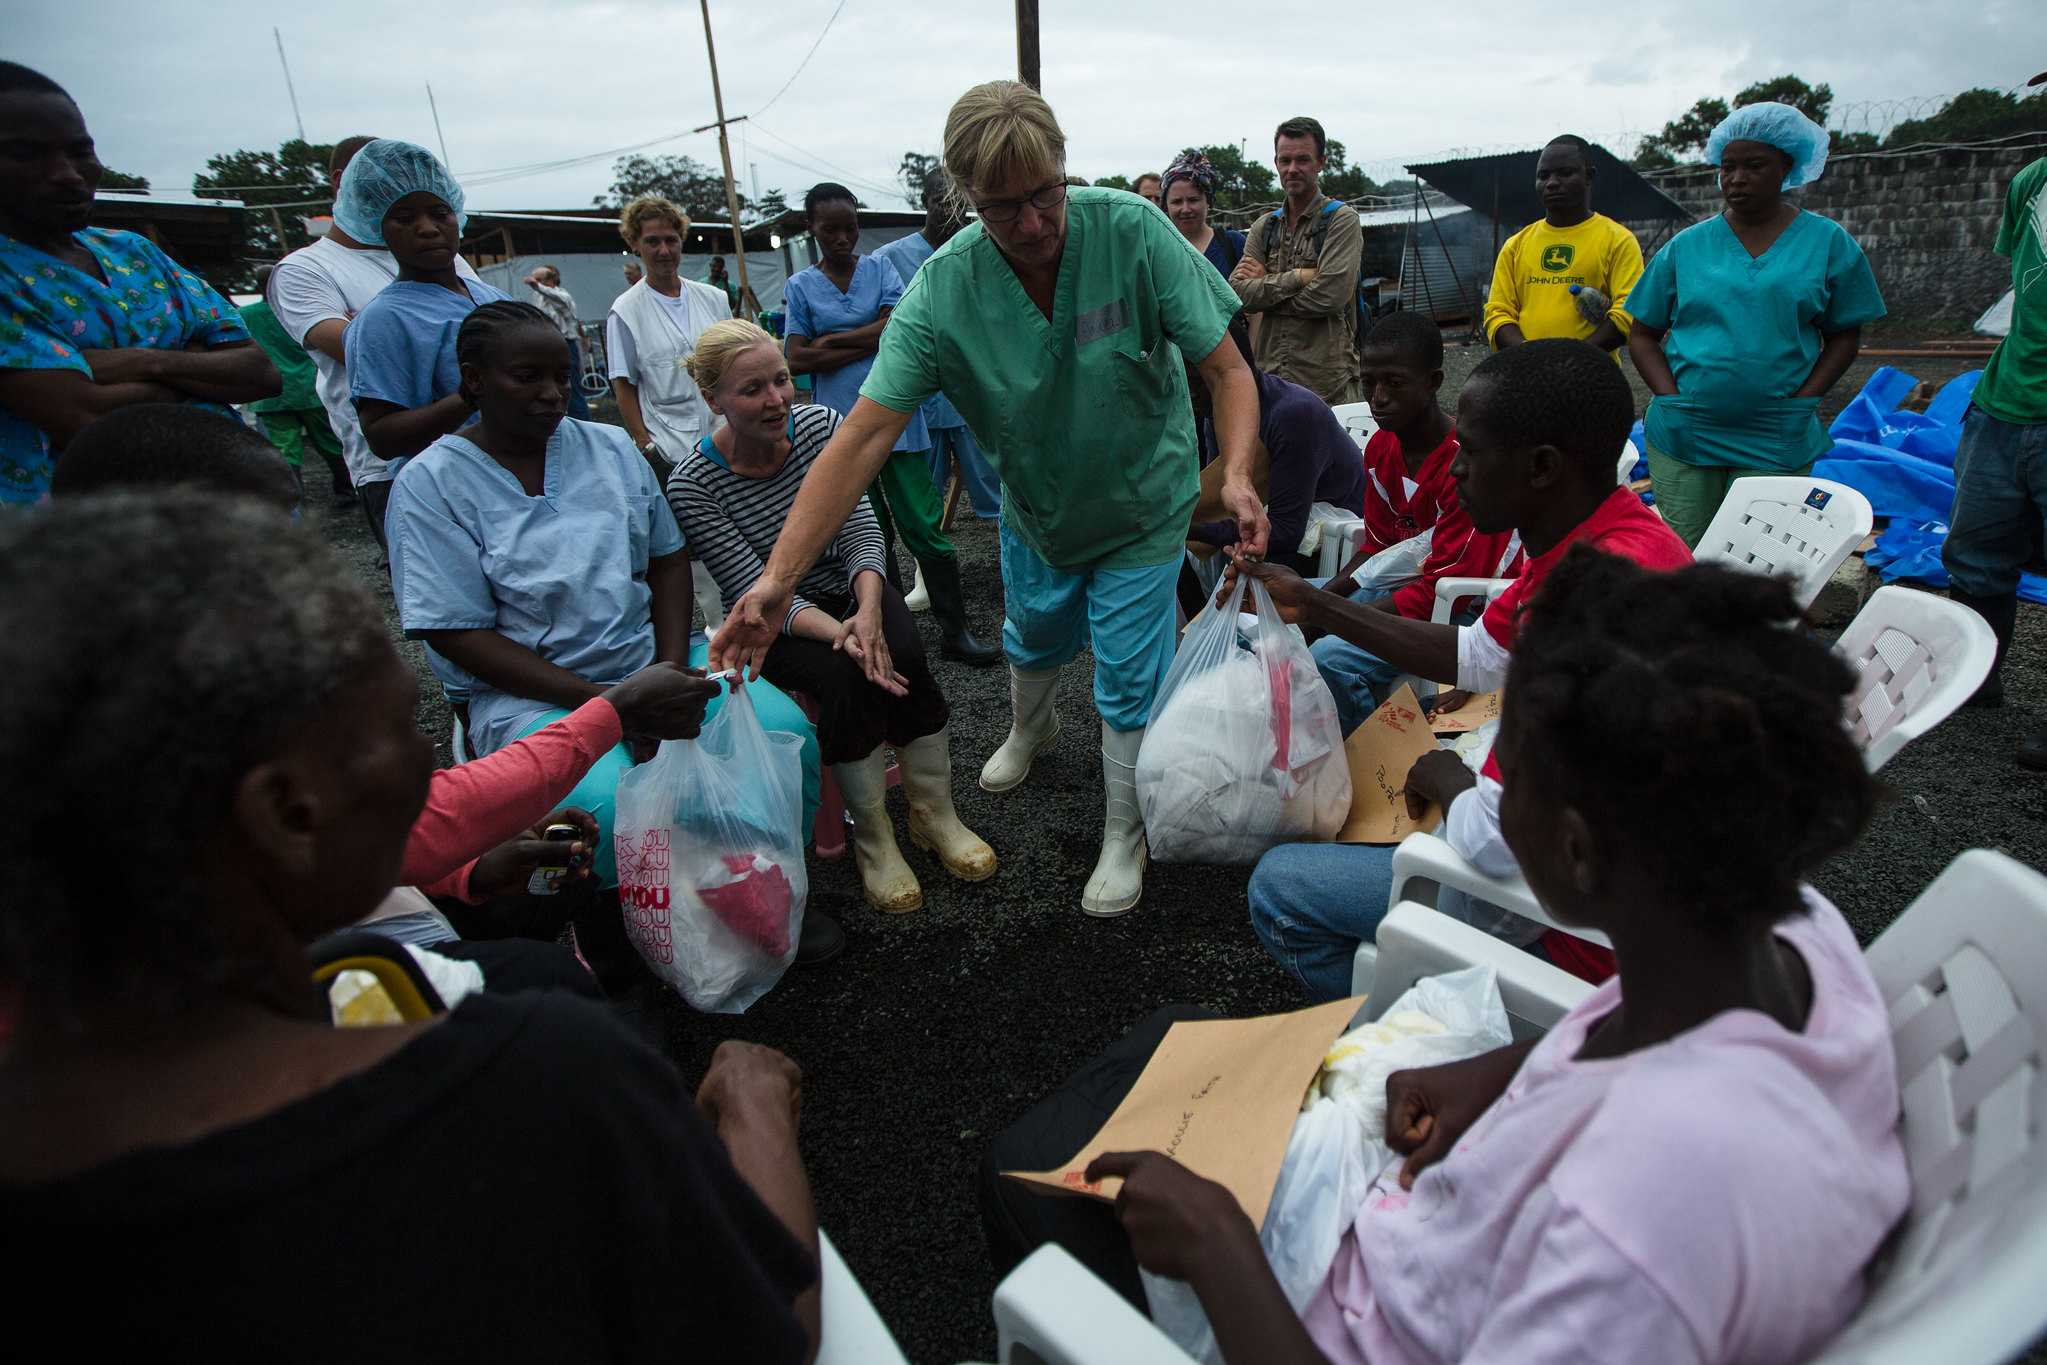 Doctors Without Borders staff distribute take-home kits for Ebola survivors in Liberia.